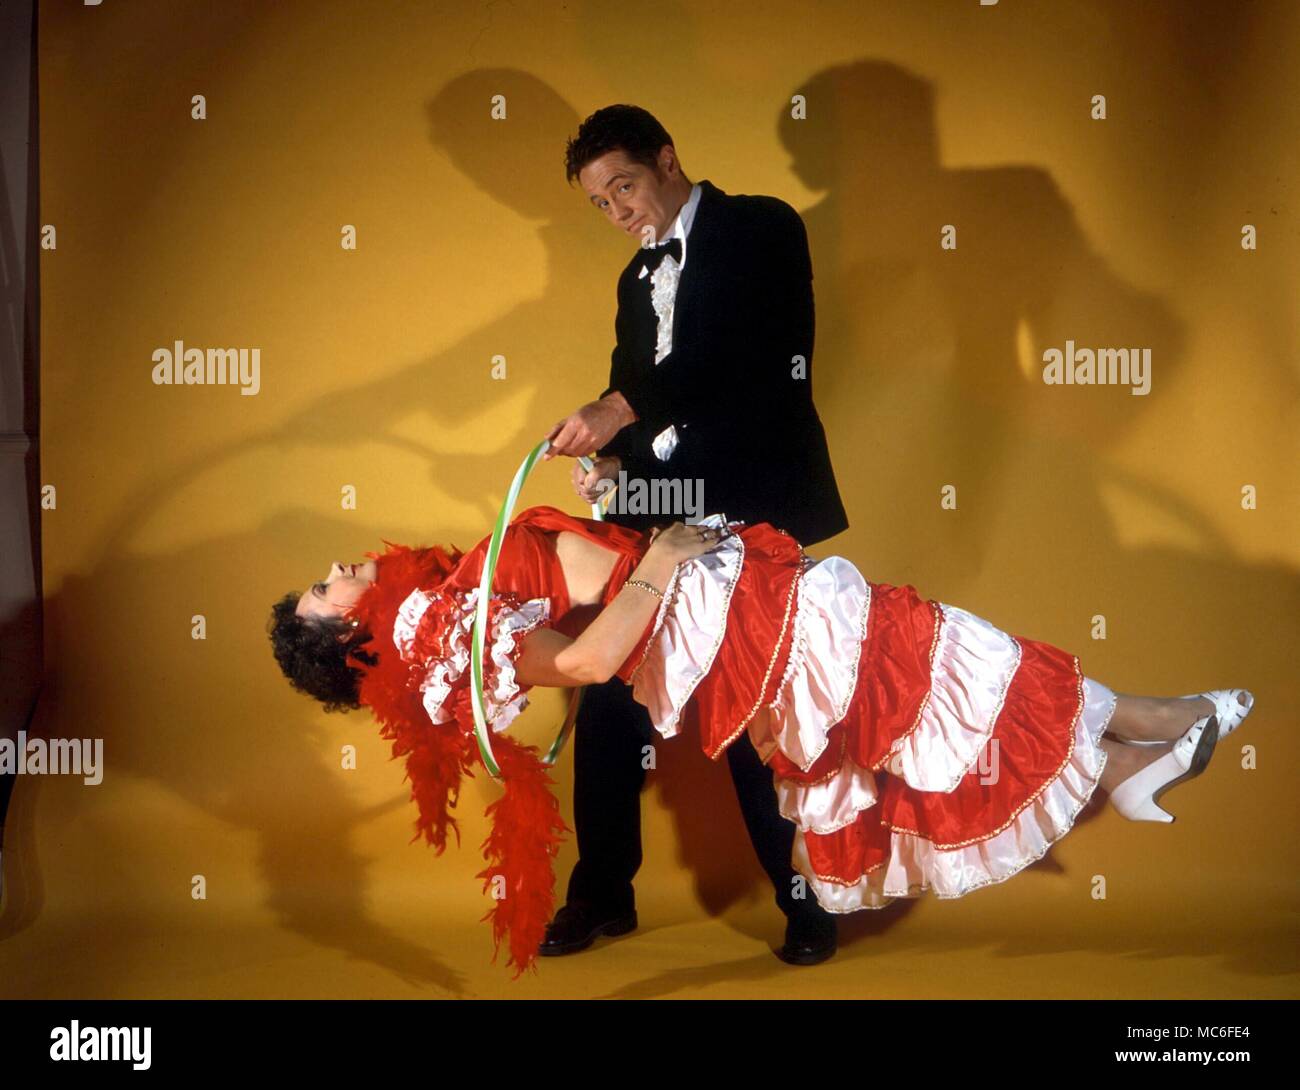 STAGE MAGIC - The magician who has caused the woman to float in the air (levitate) passes a hoop along her body to show that she is not being supported, and that there is no trickery Stock Photo